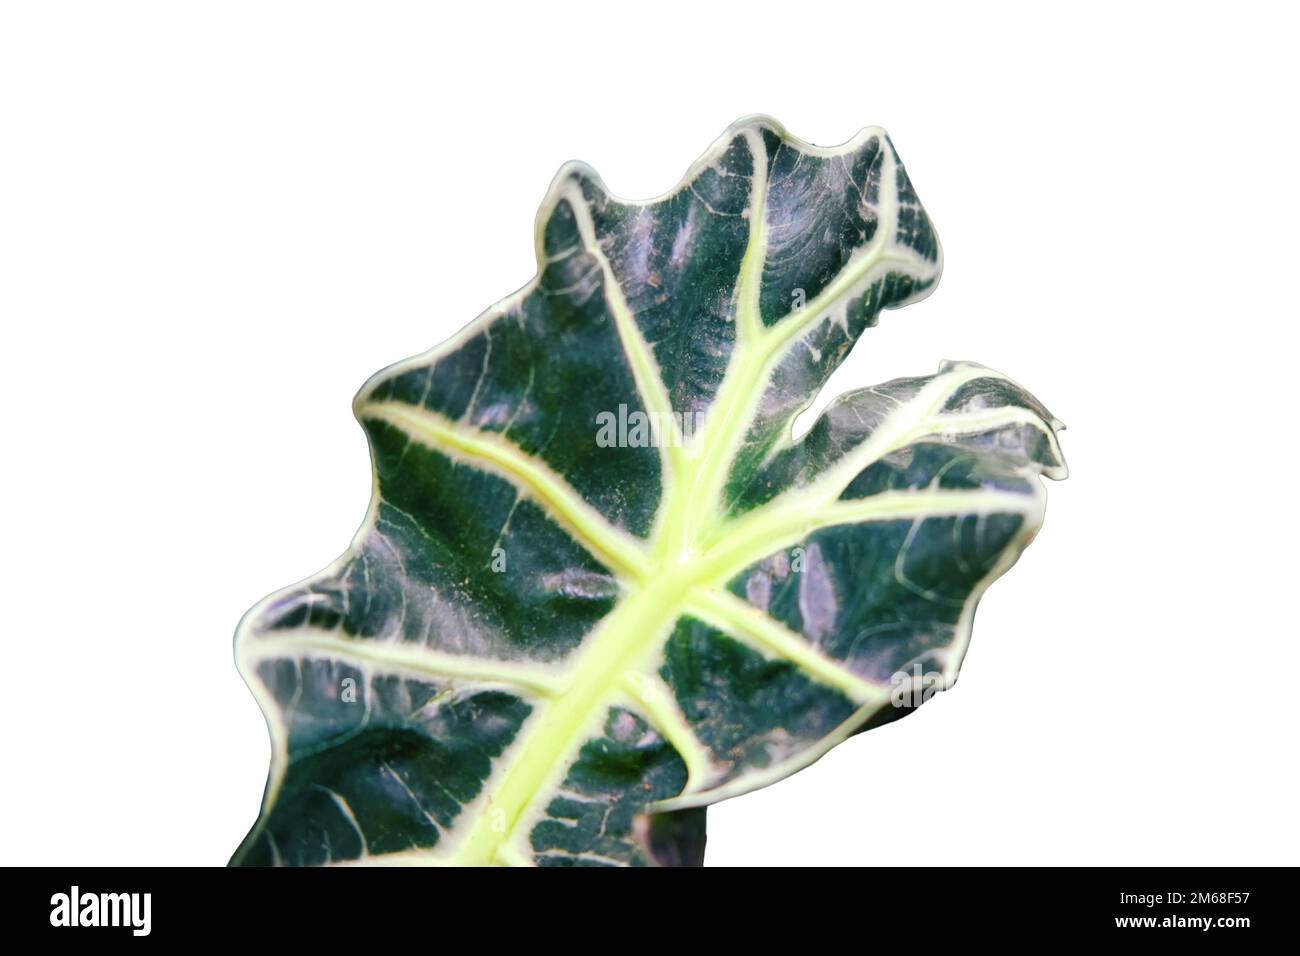 Alocasia x amazonica (Amazonian Elephant Ear) is a robust rhizomatous evergreen perennial with dark green color, isolated on a white background Stock Photo